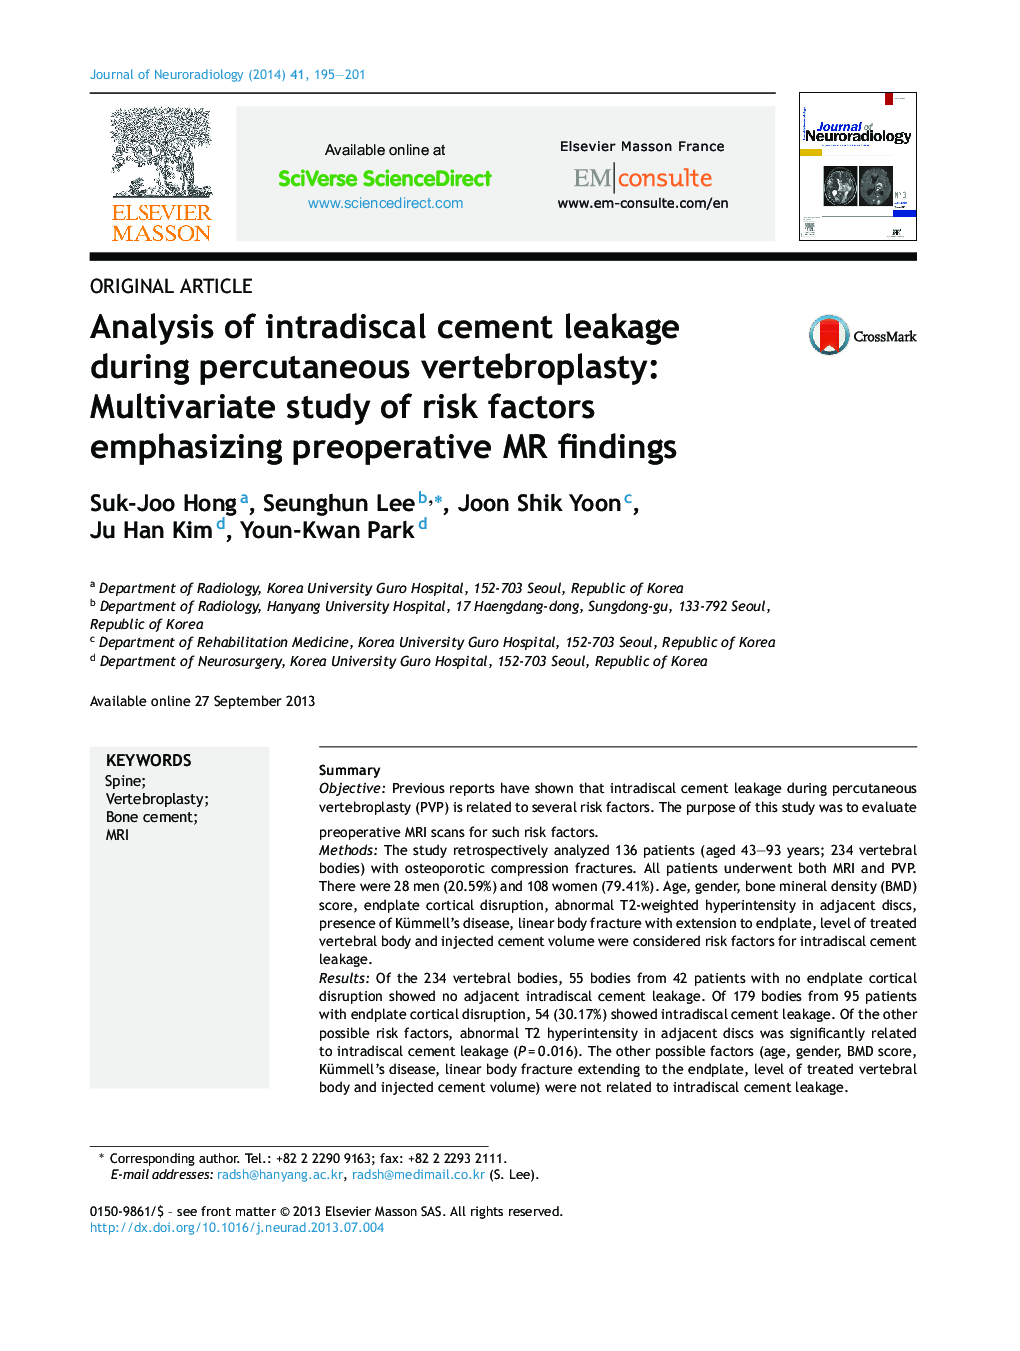 Analysis of intradiscal cement leakage during percutaneous vertebroplasty: Multivariate study of risk factors emphasizing preoperative MR findings